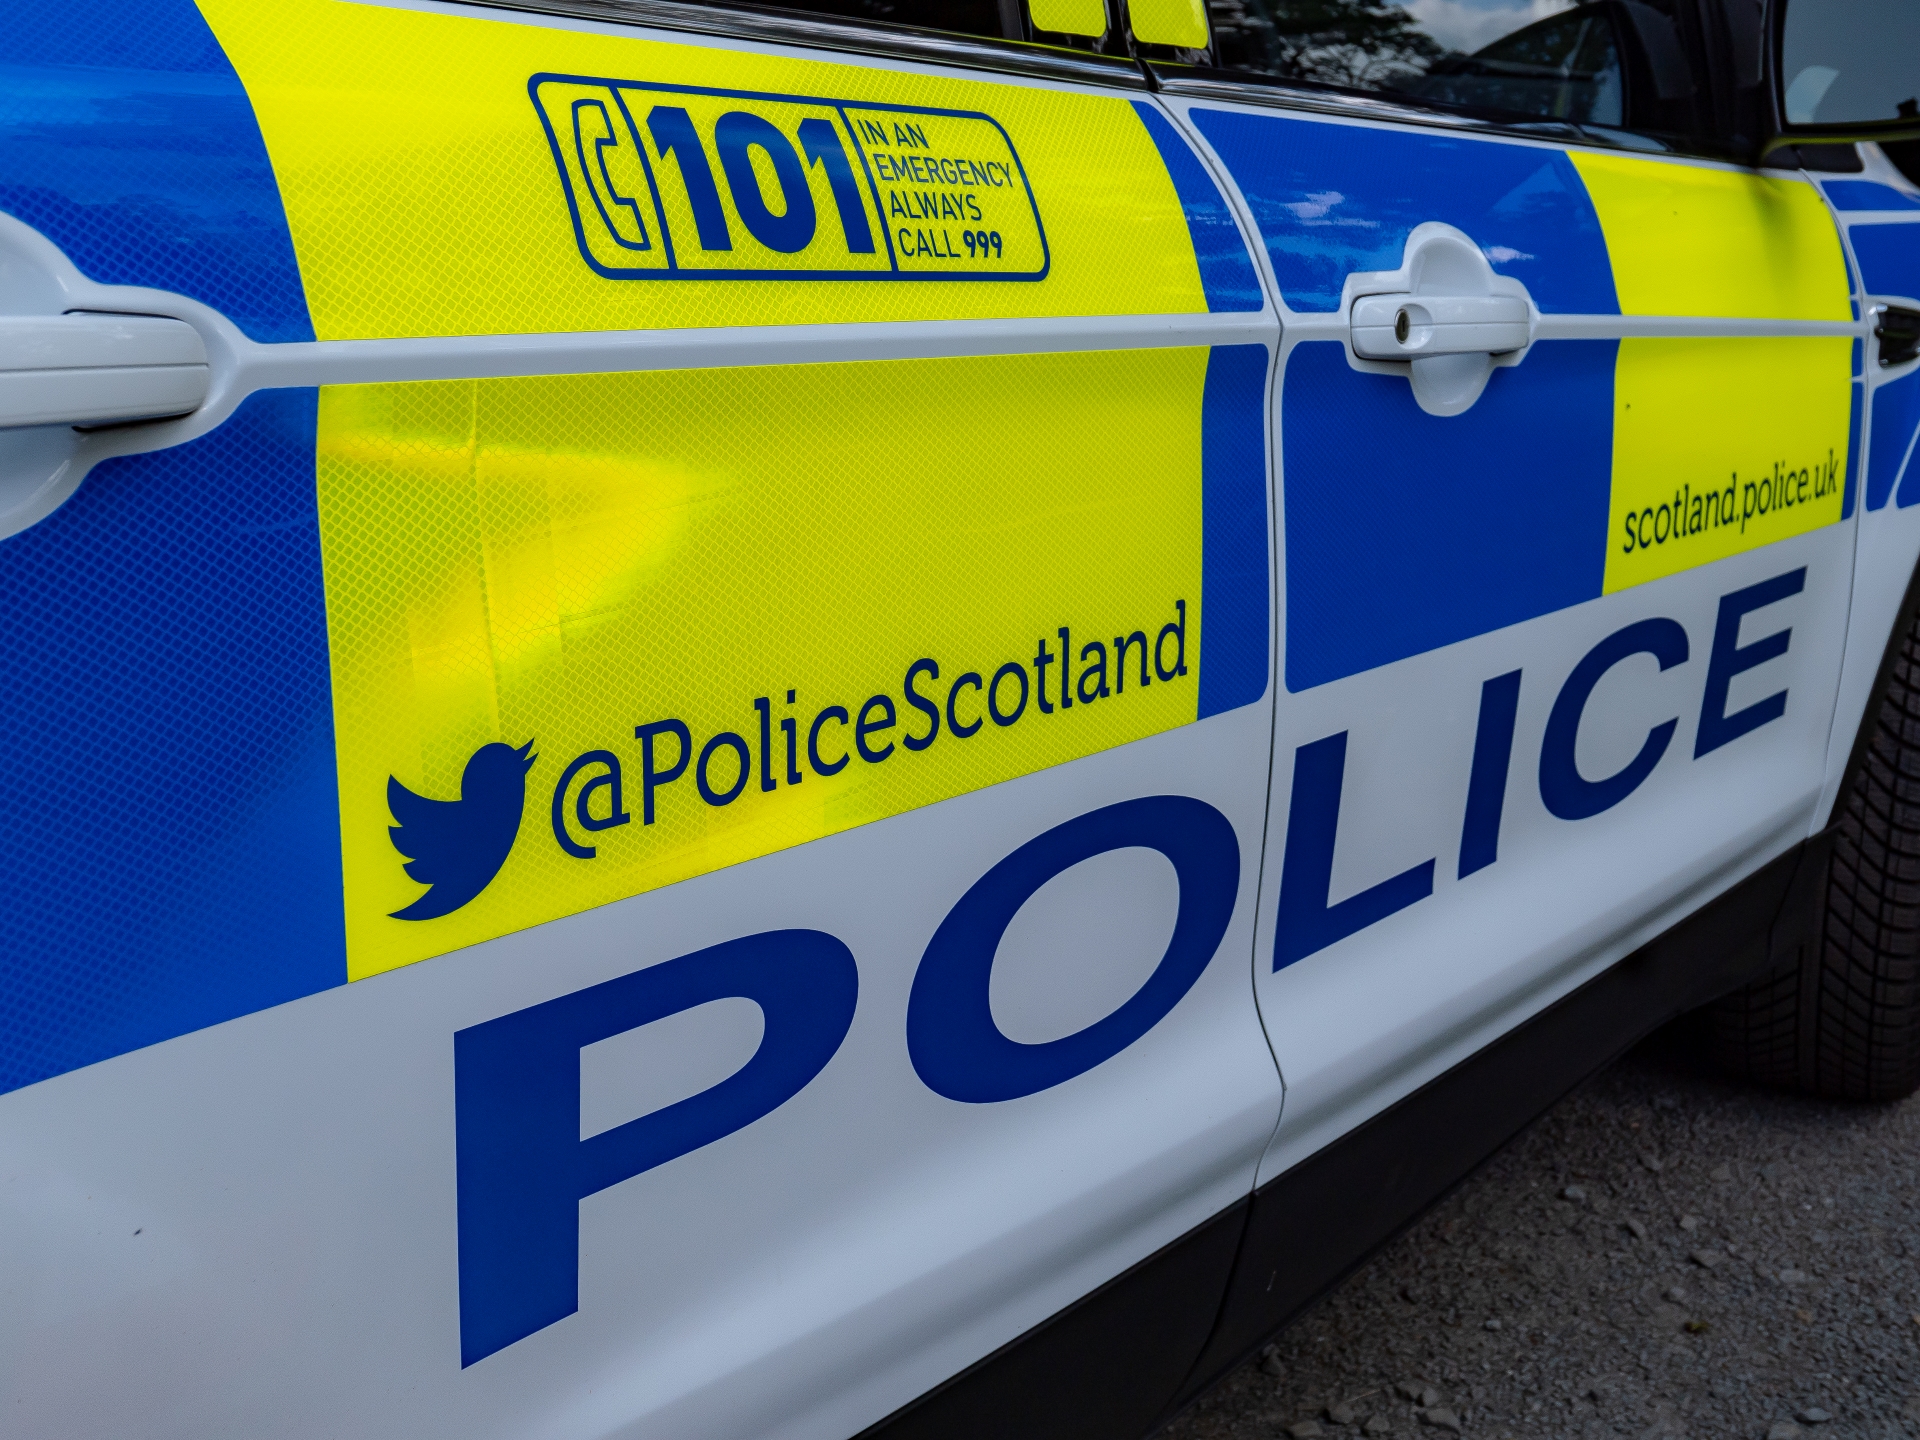 Police Scotland has pledged to investigate every hate crime complaint.